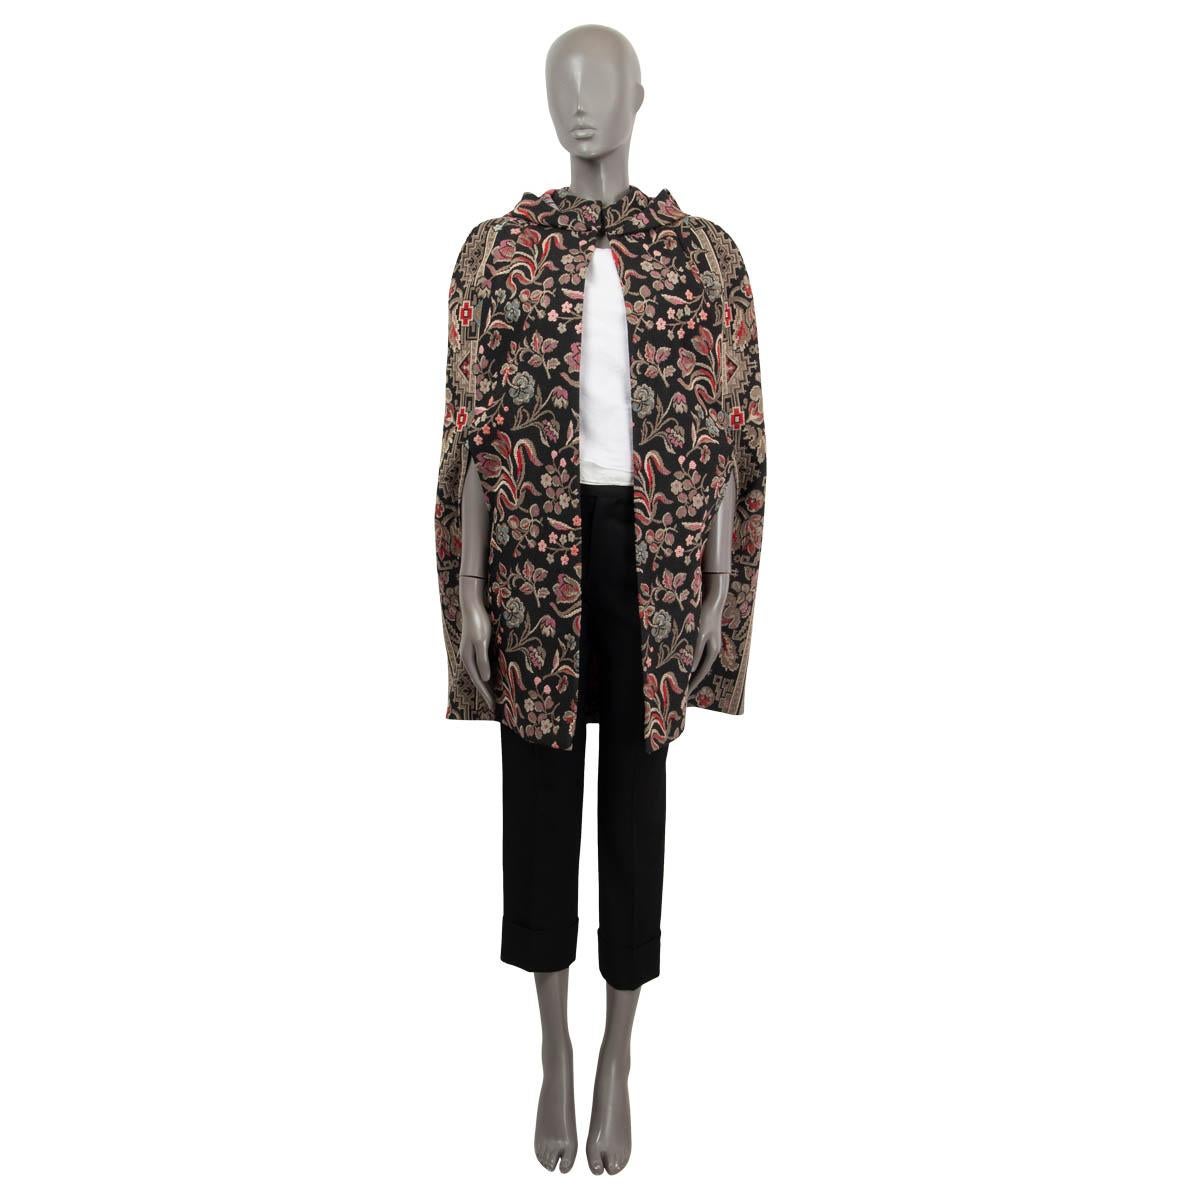 100% authentic Valentino hooded cape in black, pink, taupe, red and light blue floral jacquard cotton (74%), polyester (20%) and viscose (6%). Featrures has a stand-up color and a box pleat at the back. Closes with a single hook on the neck. Has